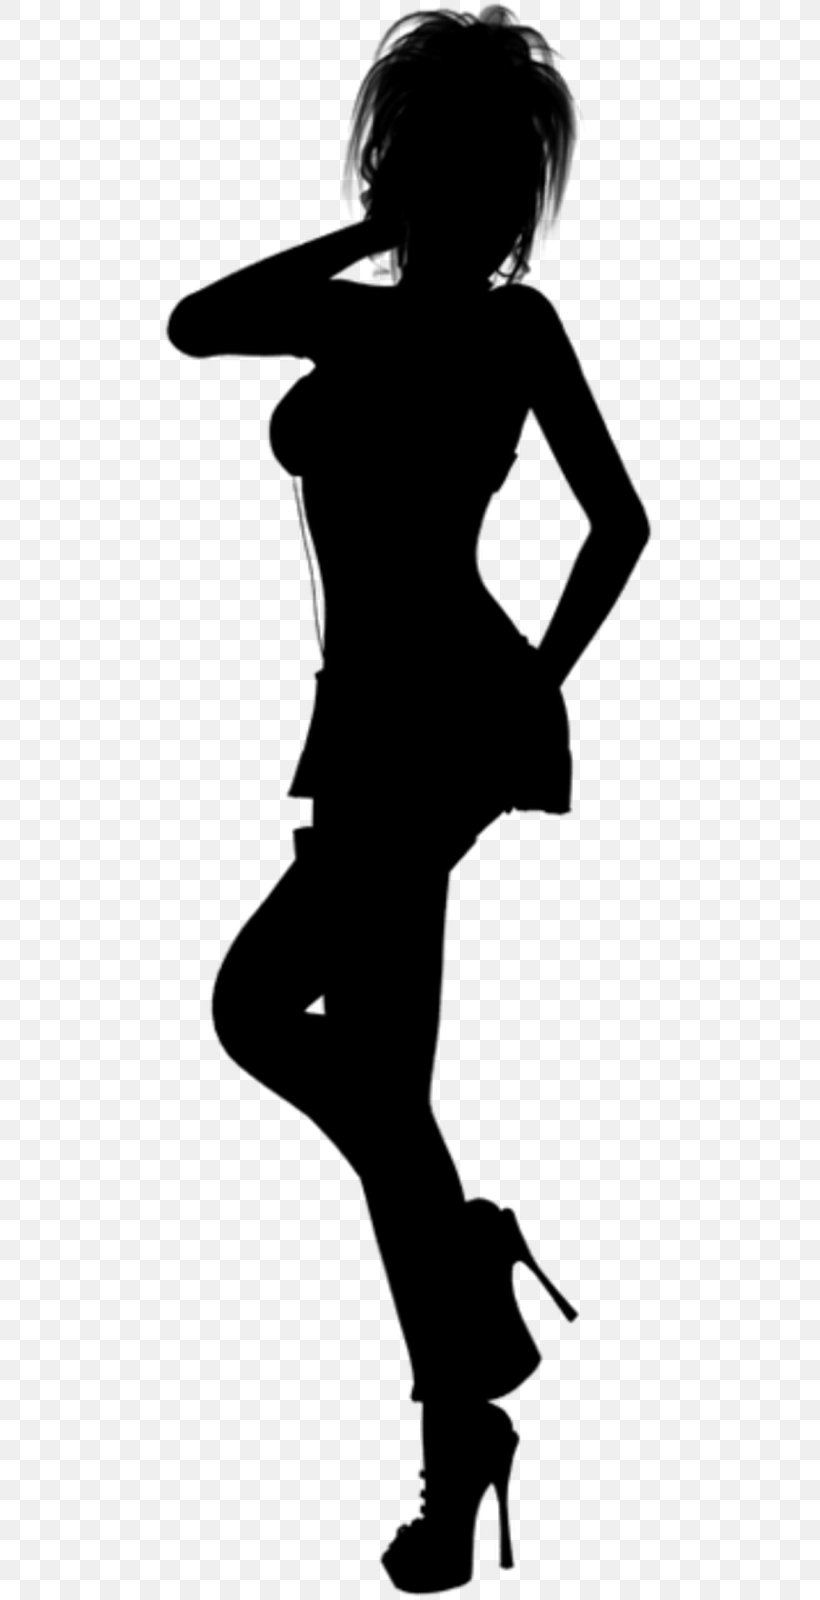 Silhouette Shadow Drawing Clip Art, PNG, 495x1600px, Silhouette, Arm, Art, Black, Black And White Download Free